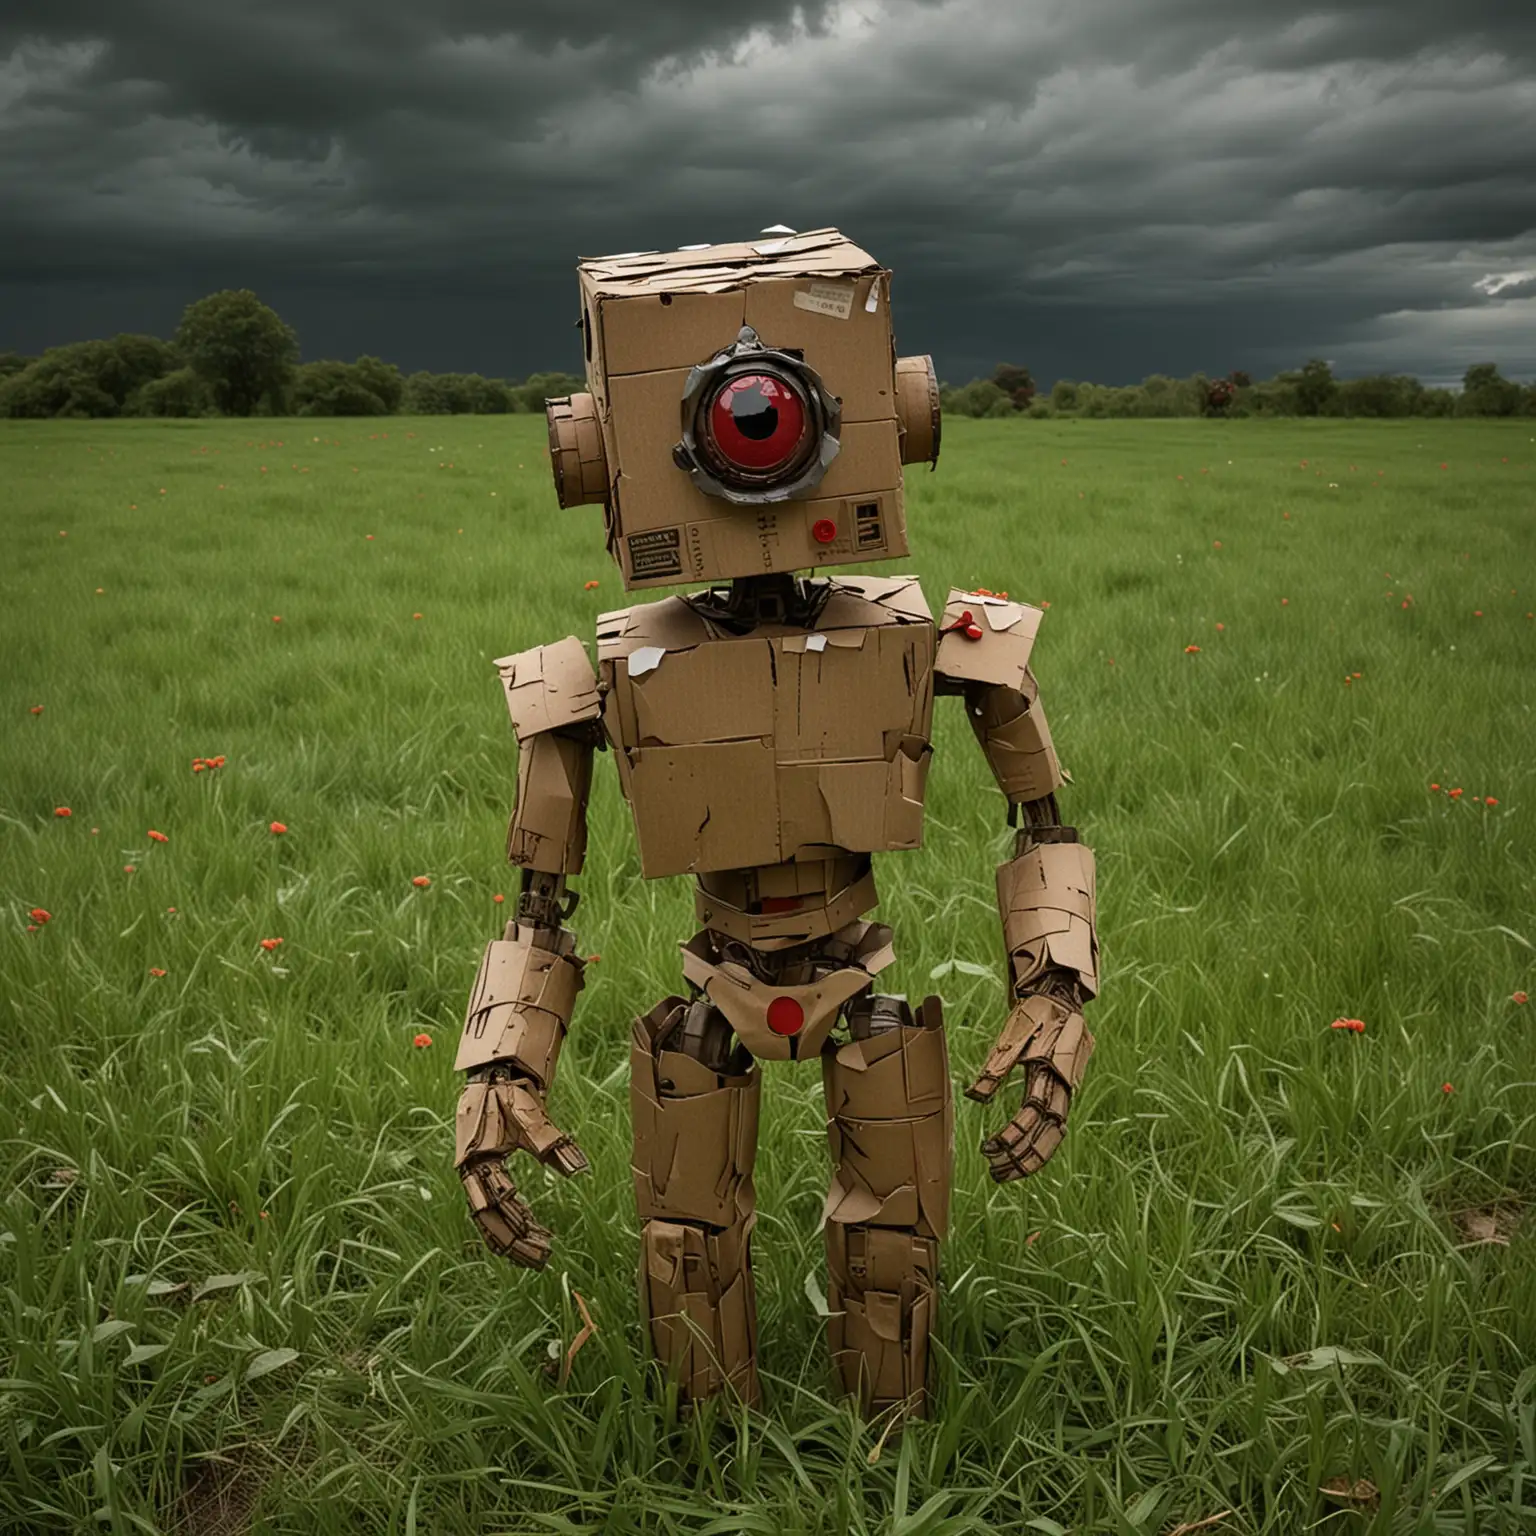 A humanoid figure made of cardboard boxes stands on green grass. He has a large, rusted, and damaged metal head with a singular red camera-like eye. The sky is overcast with dark clouds, and crumpled pieces of paper are scattered on the ground around.